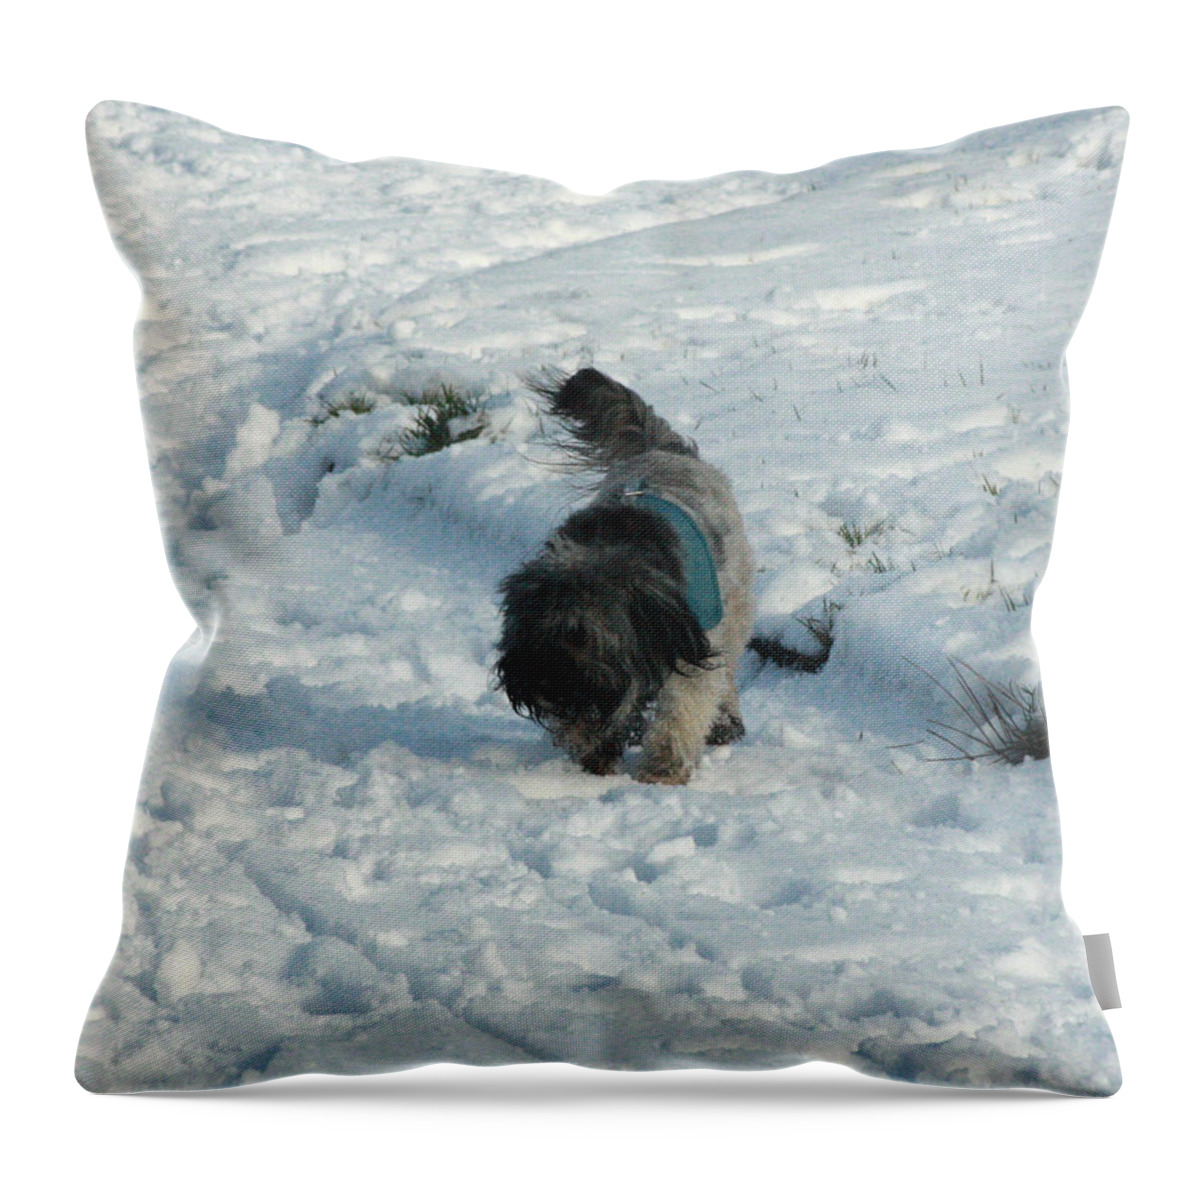 Dogs Throw Pillow featuring the photograph Snowdog by Patricia De jong